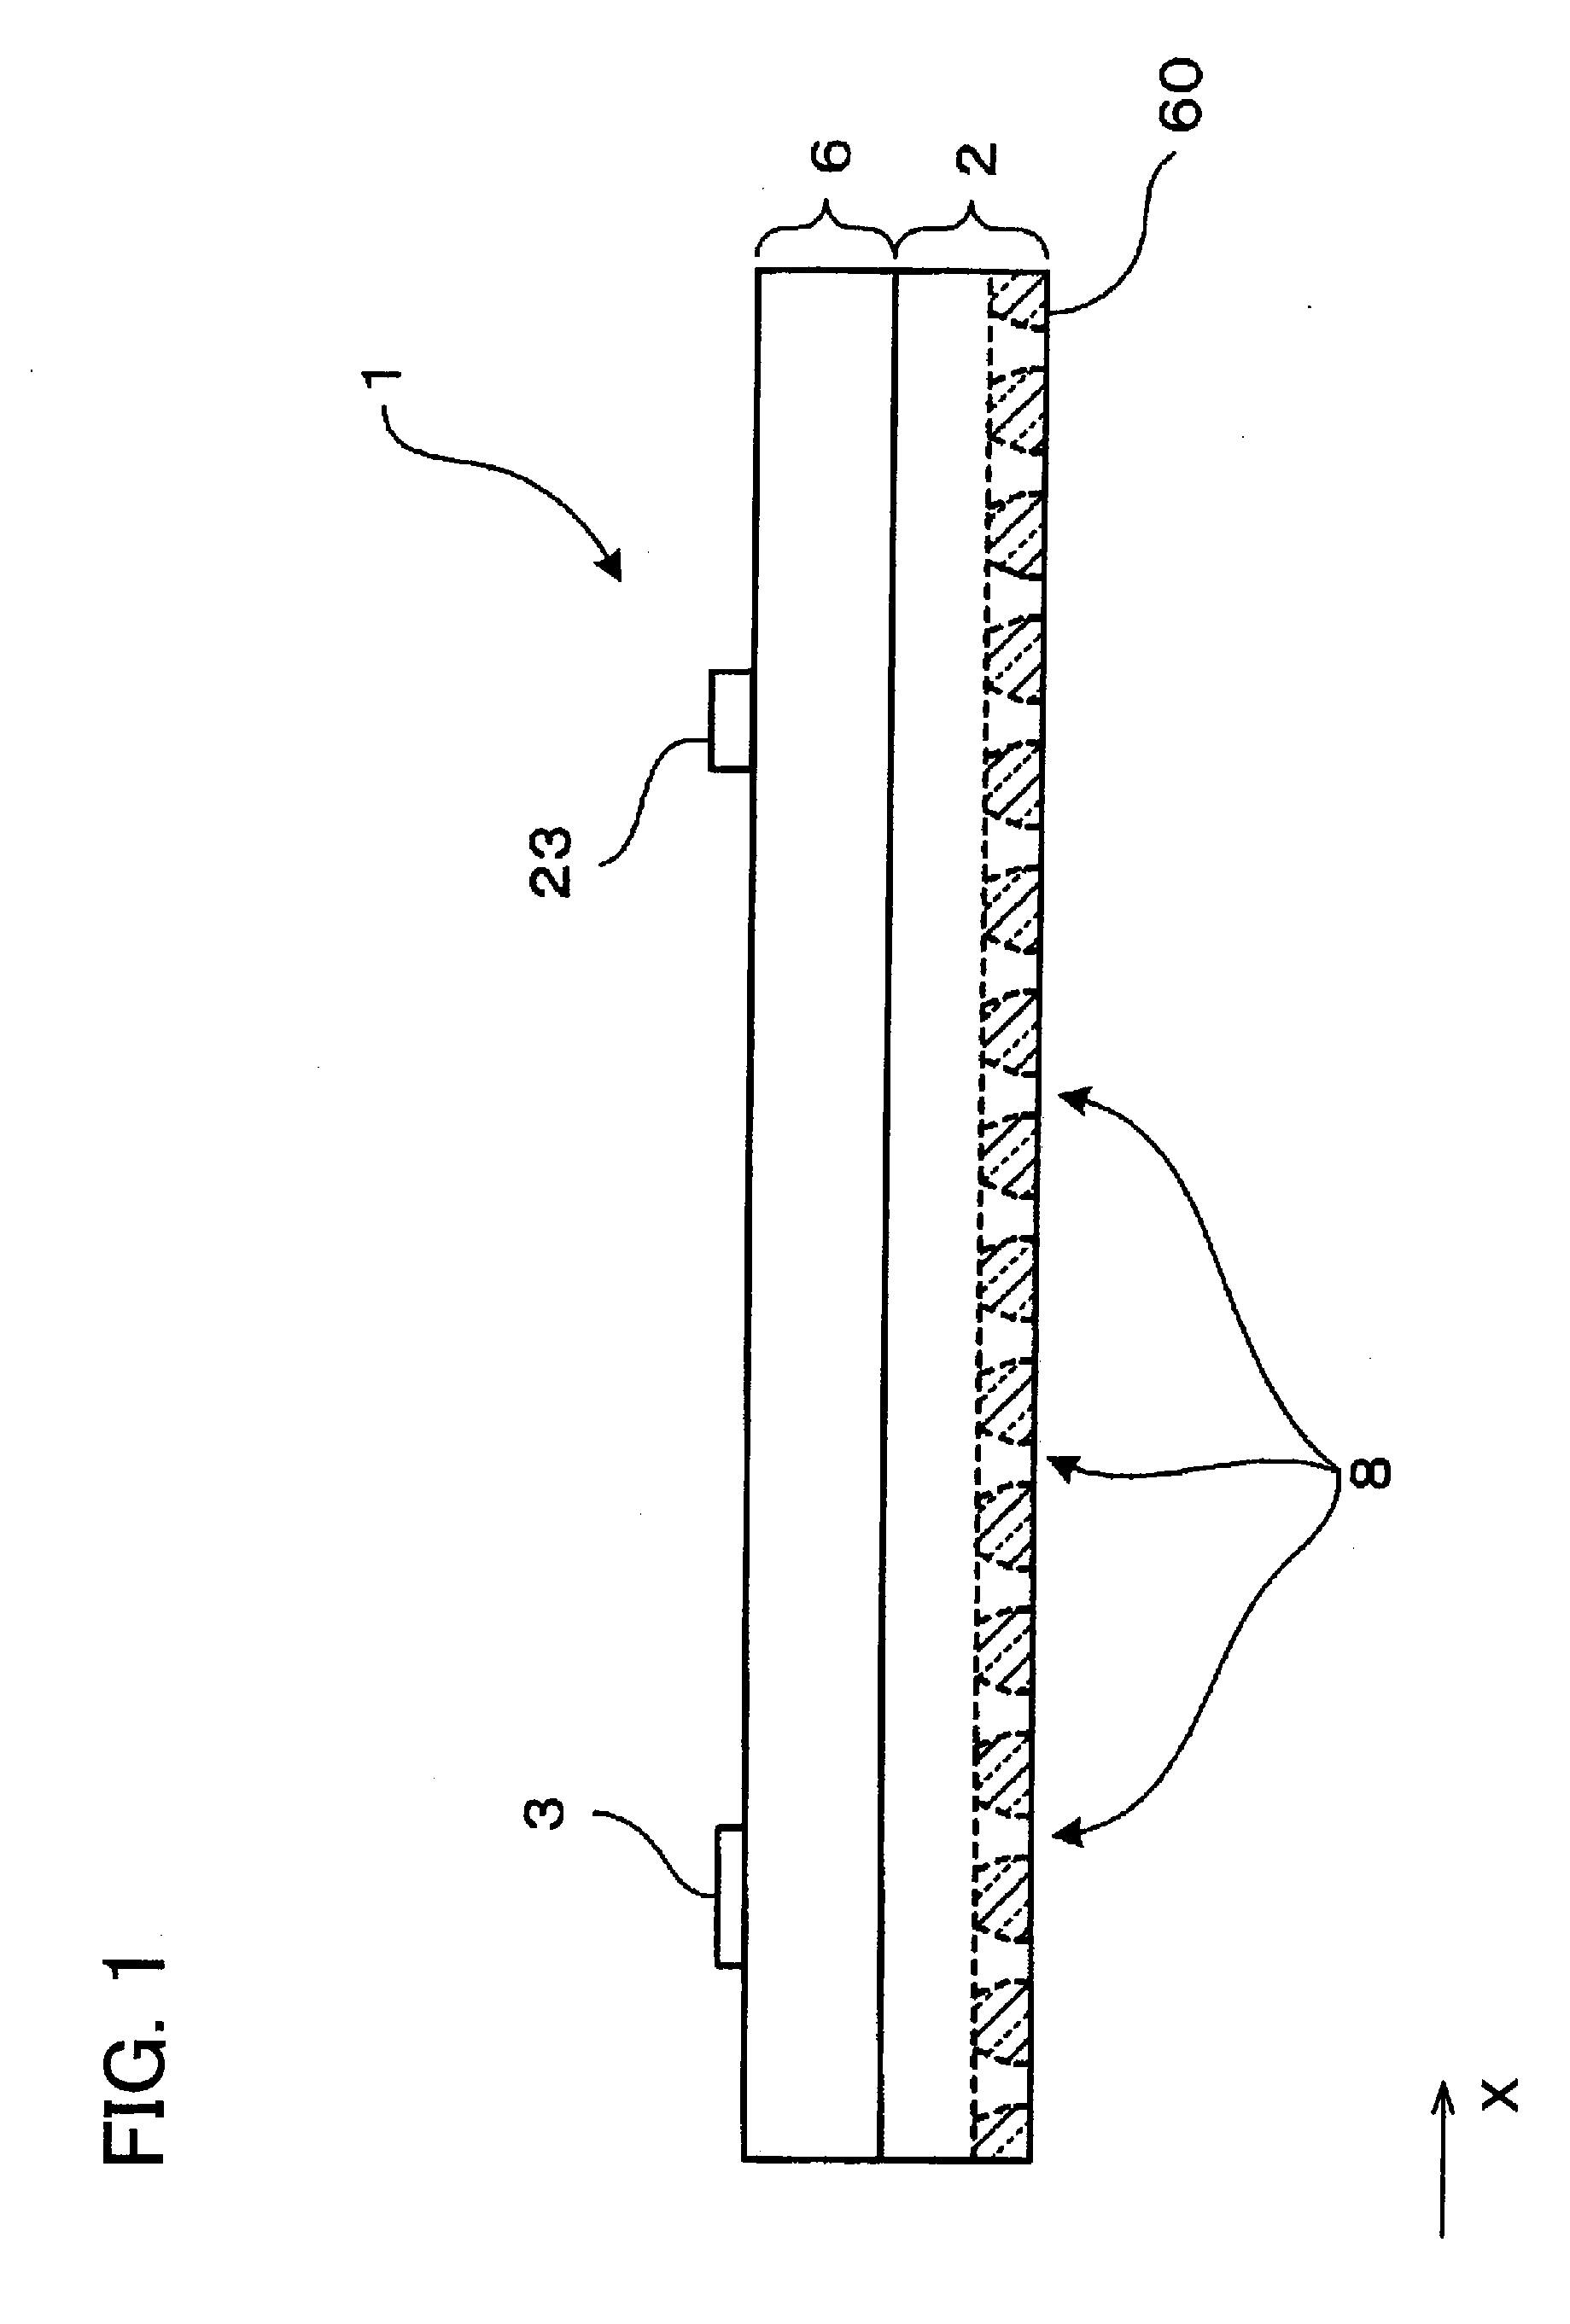 Method of Testing a Droplet Discharge Device